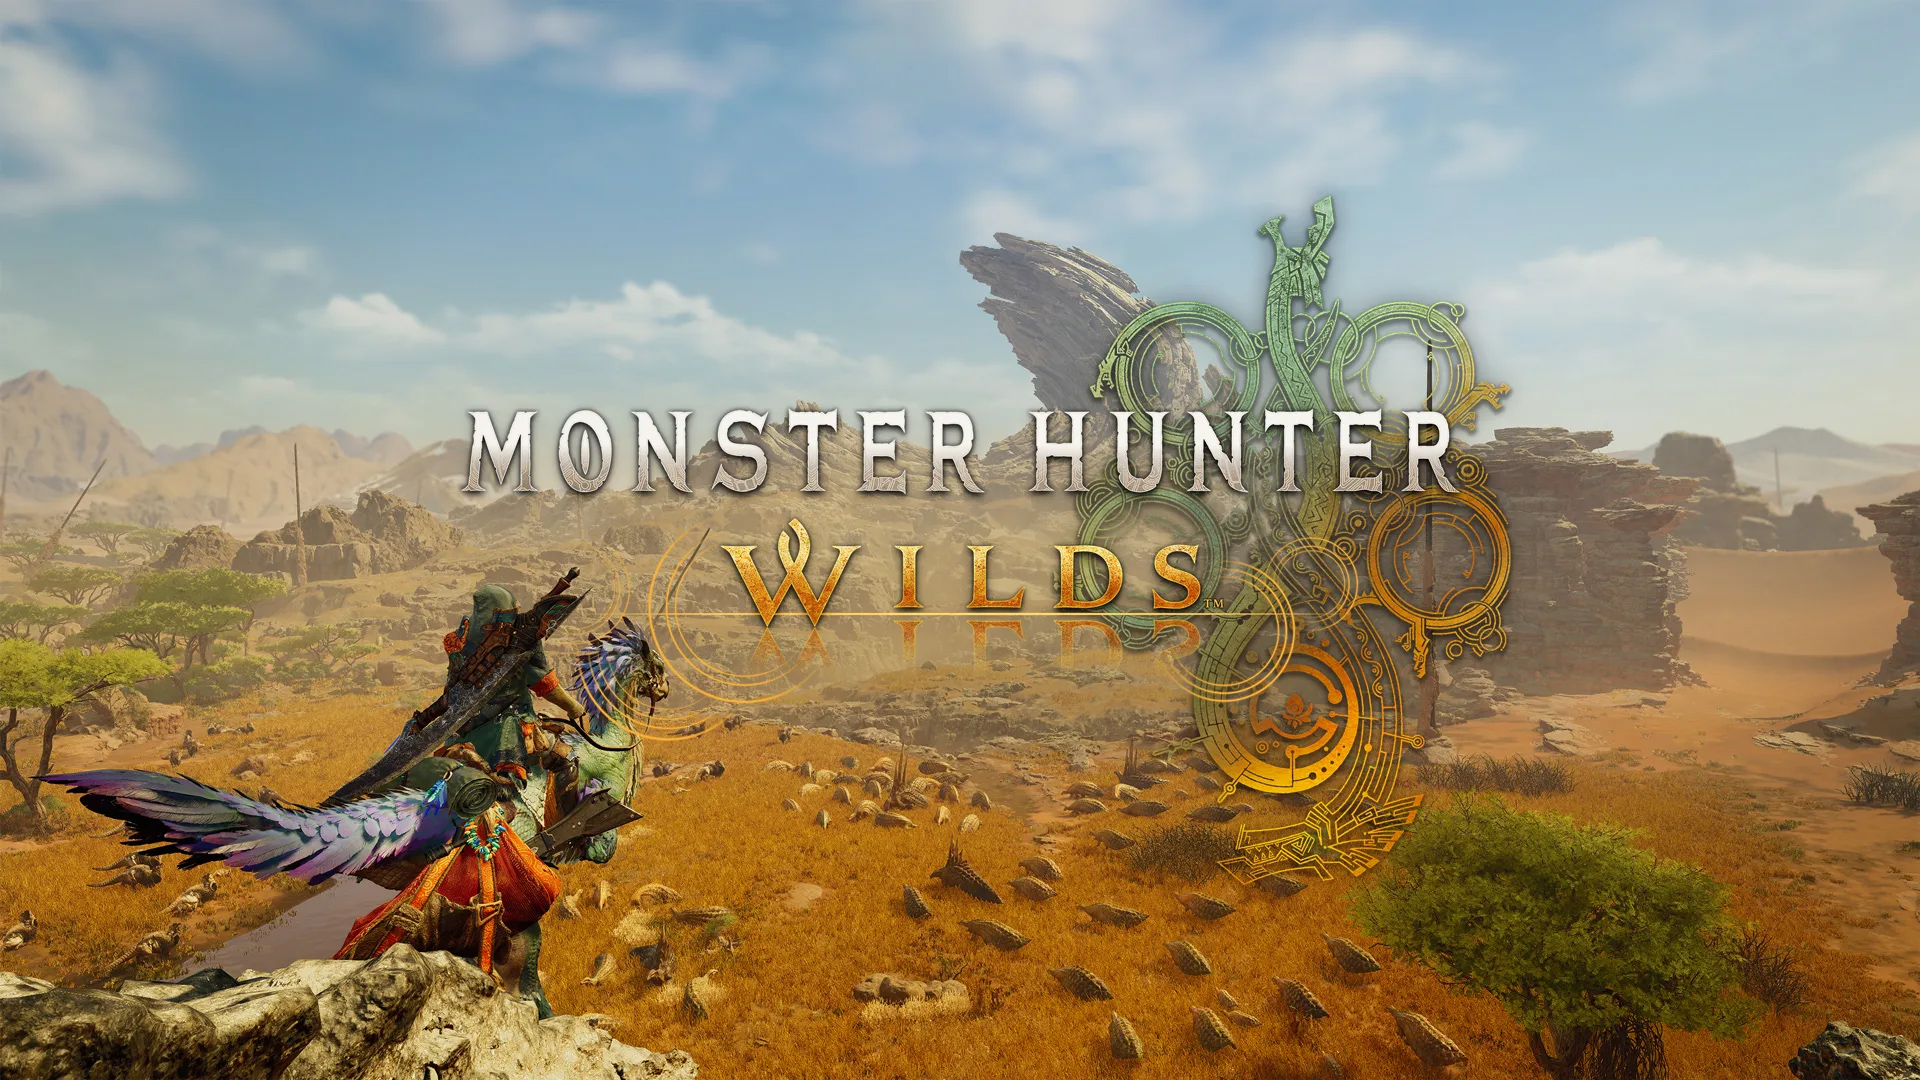 We got our first look at Monster Hunter Wilds gameplay